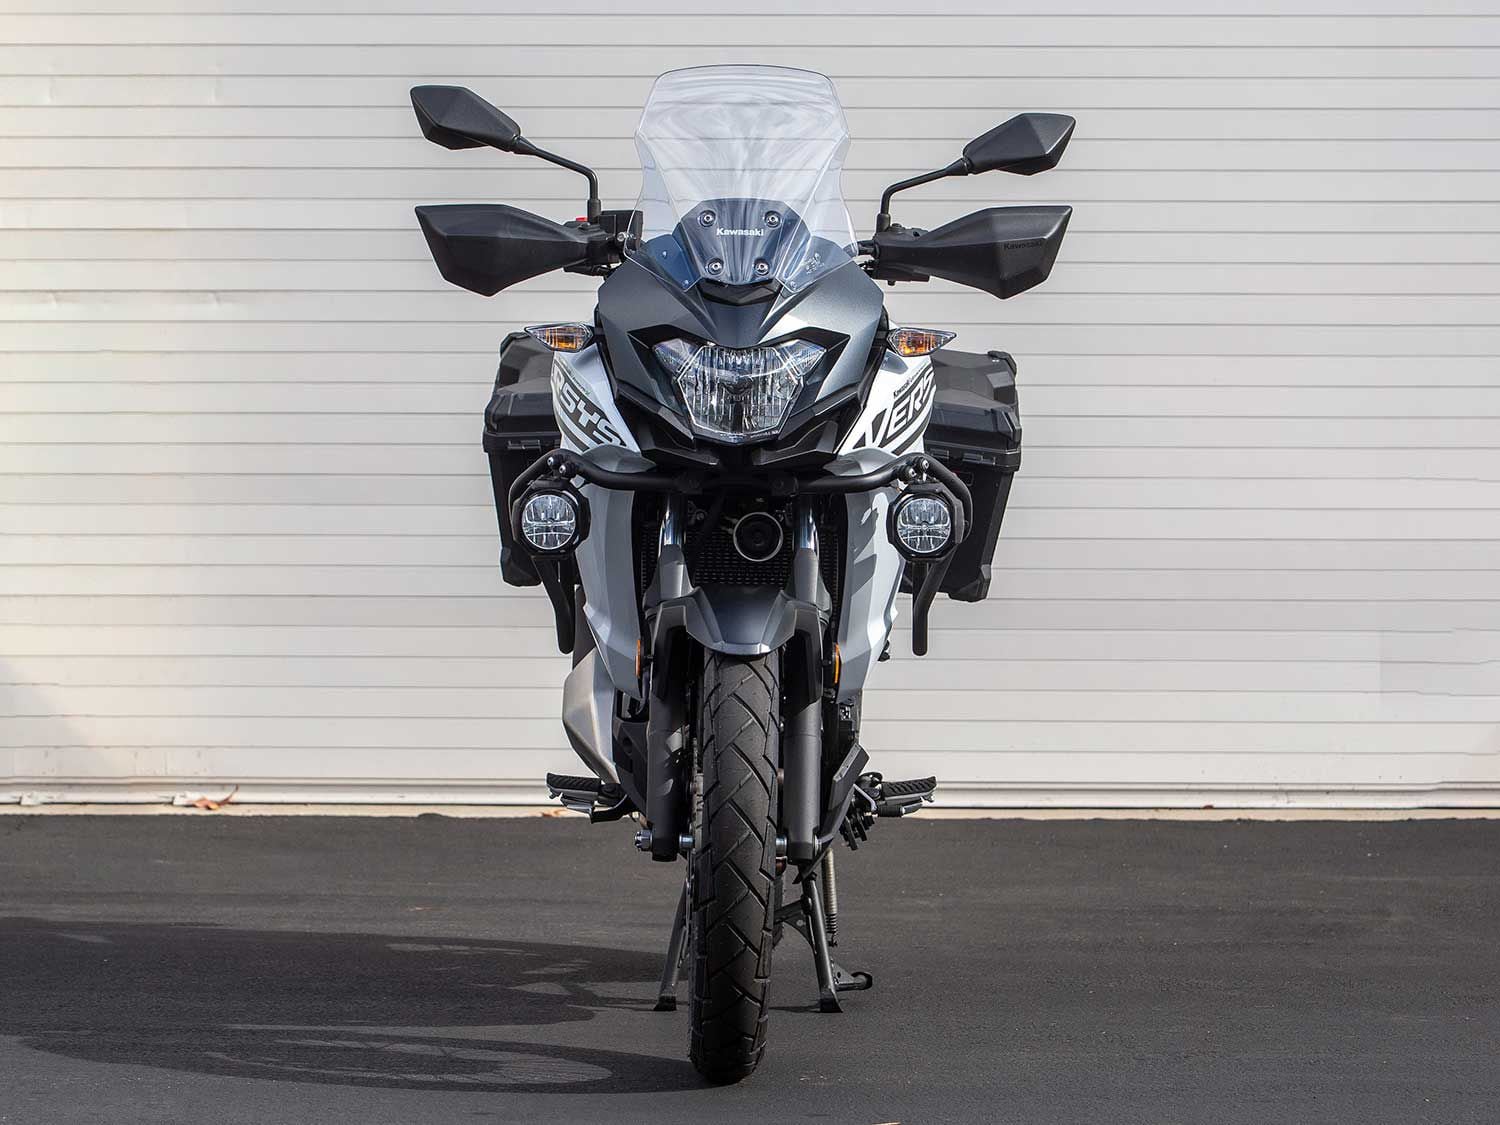 The Kawasaki Versys-X 300 packs the punch of big-bike rugged aesthetics and capability, but in a lightweight and approachable package.